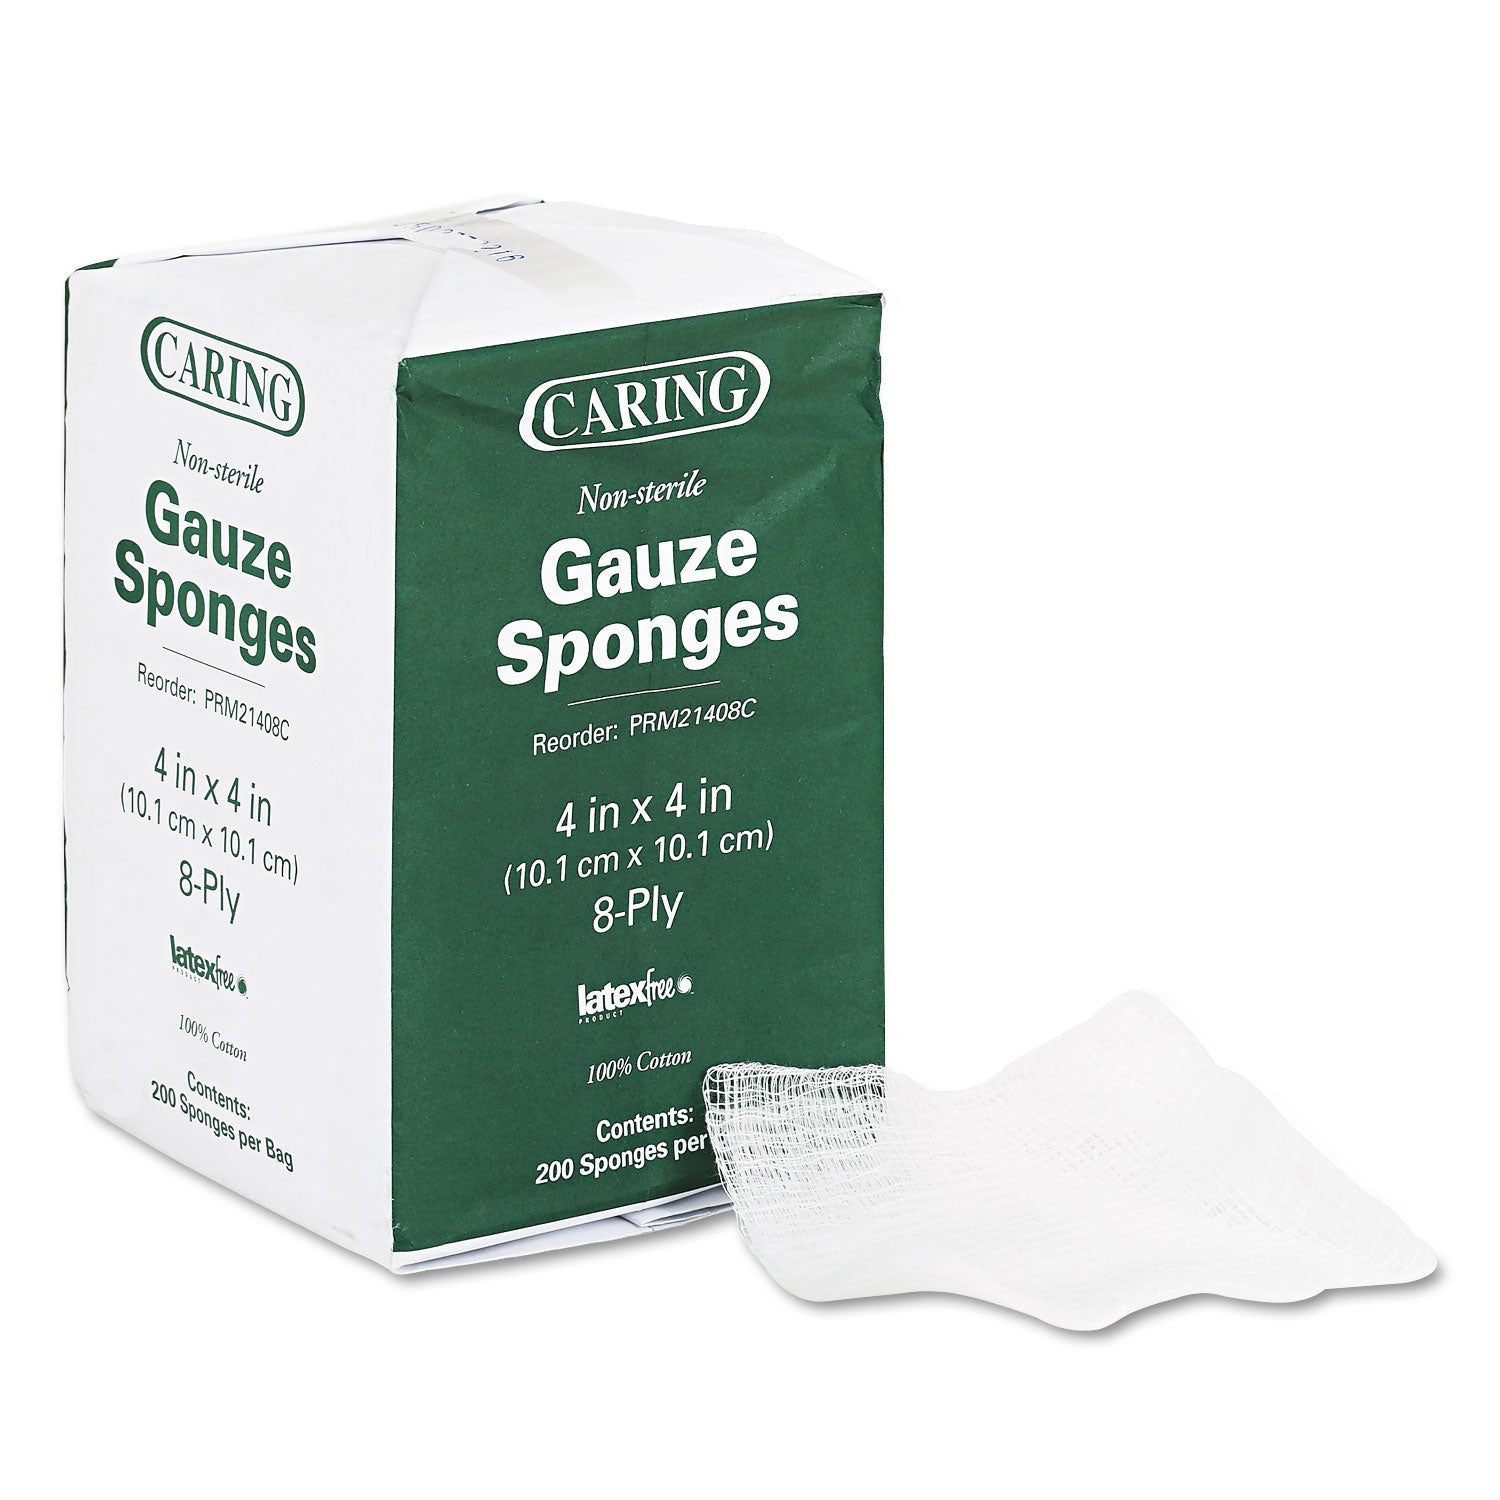 Caring Woven Gauze Sponges, Non-Sterile, 8-Ply, 4 x 4, 200/Pack - 